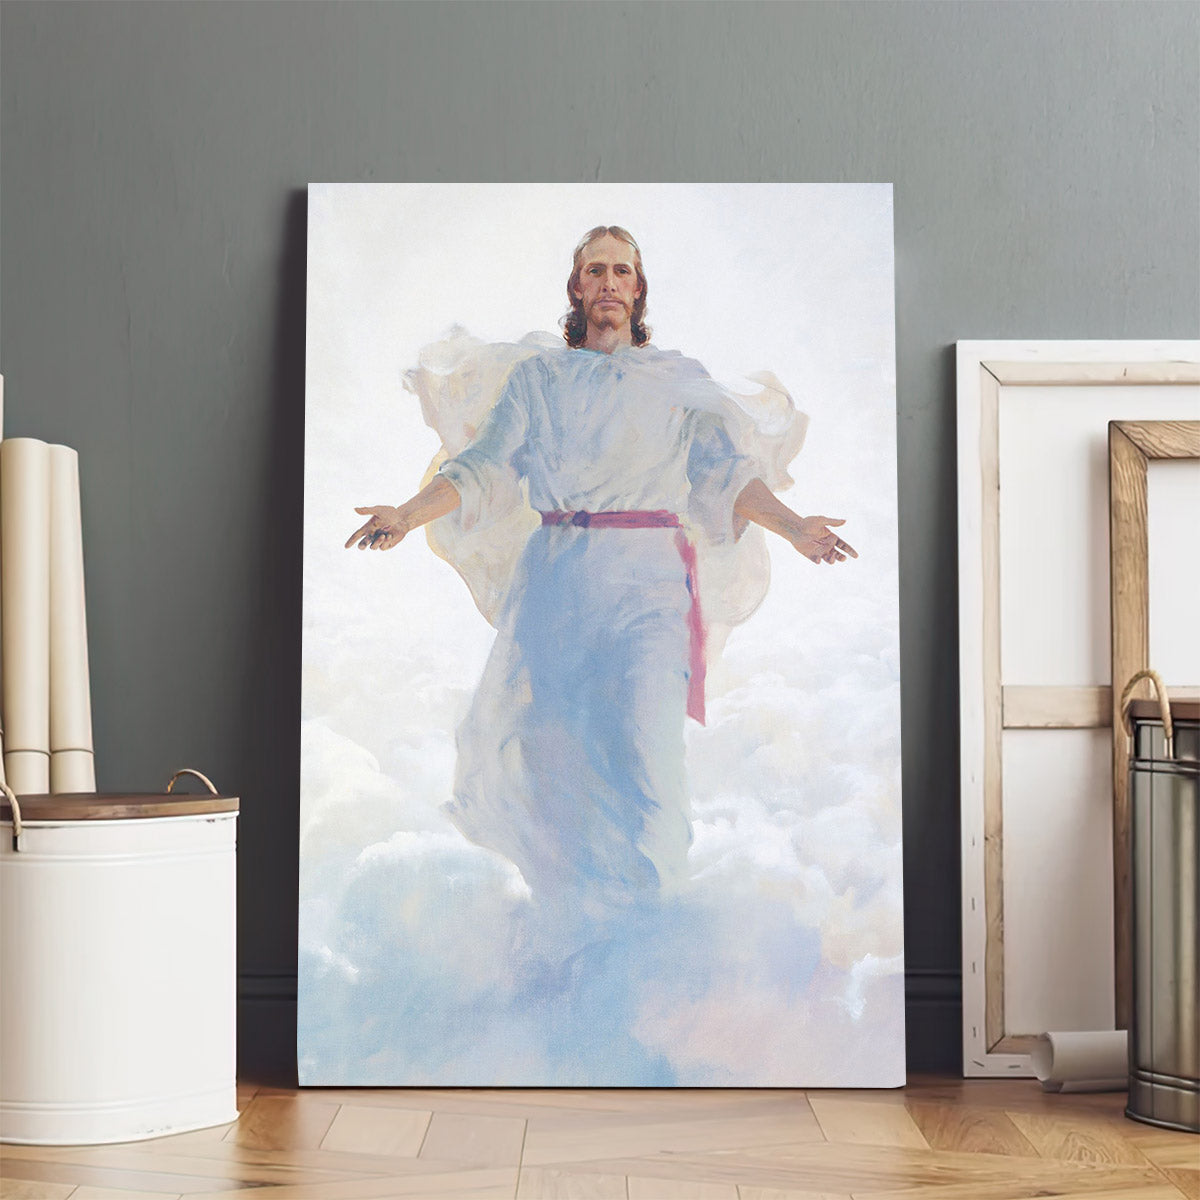 The Resurrected Jesus Christ Canvas Pictures - Religious Wall Art Canvas - Christian Paintings For Home